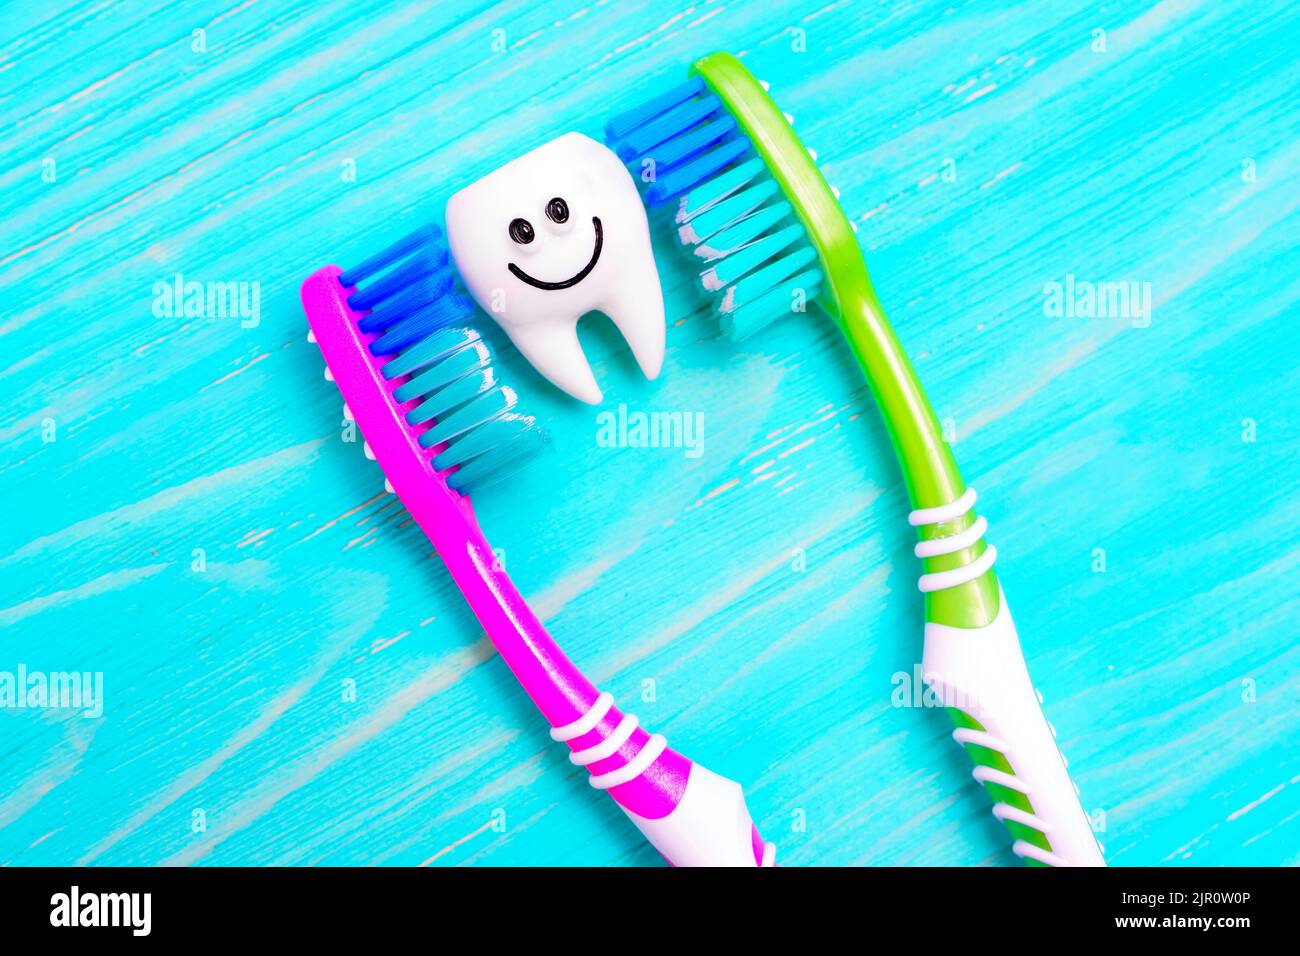 Funny tooth character between two colorful toothbrushes isolated on a blue wooden background. Daily dental hygiene routine for children. Stock Photo